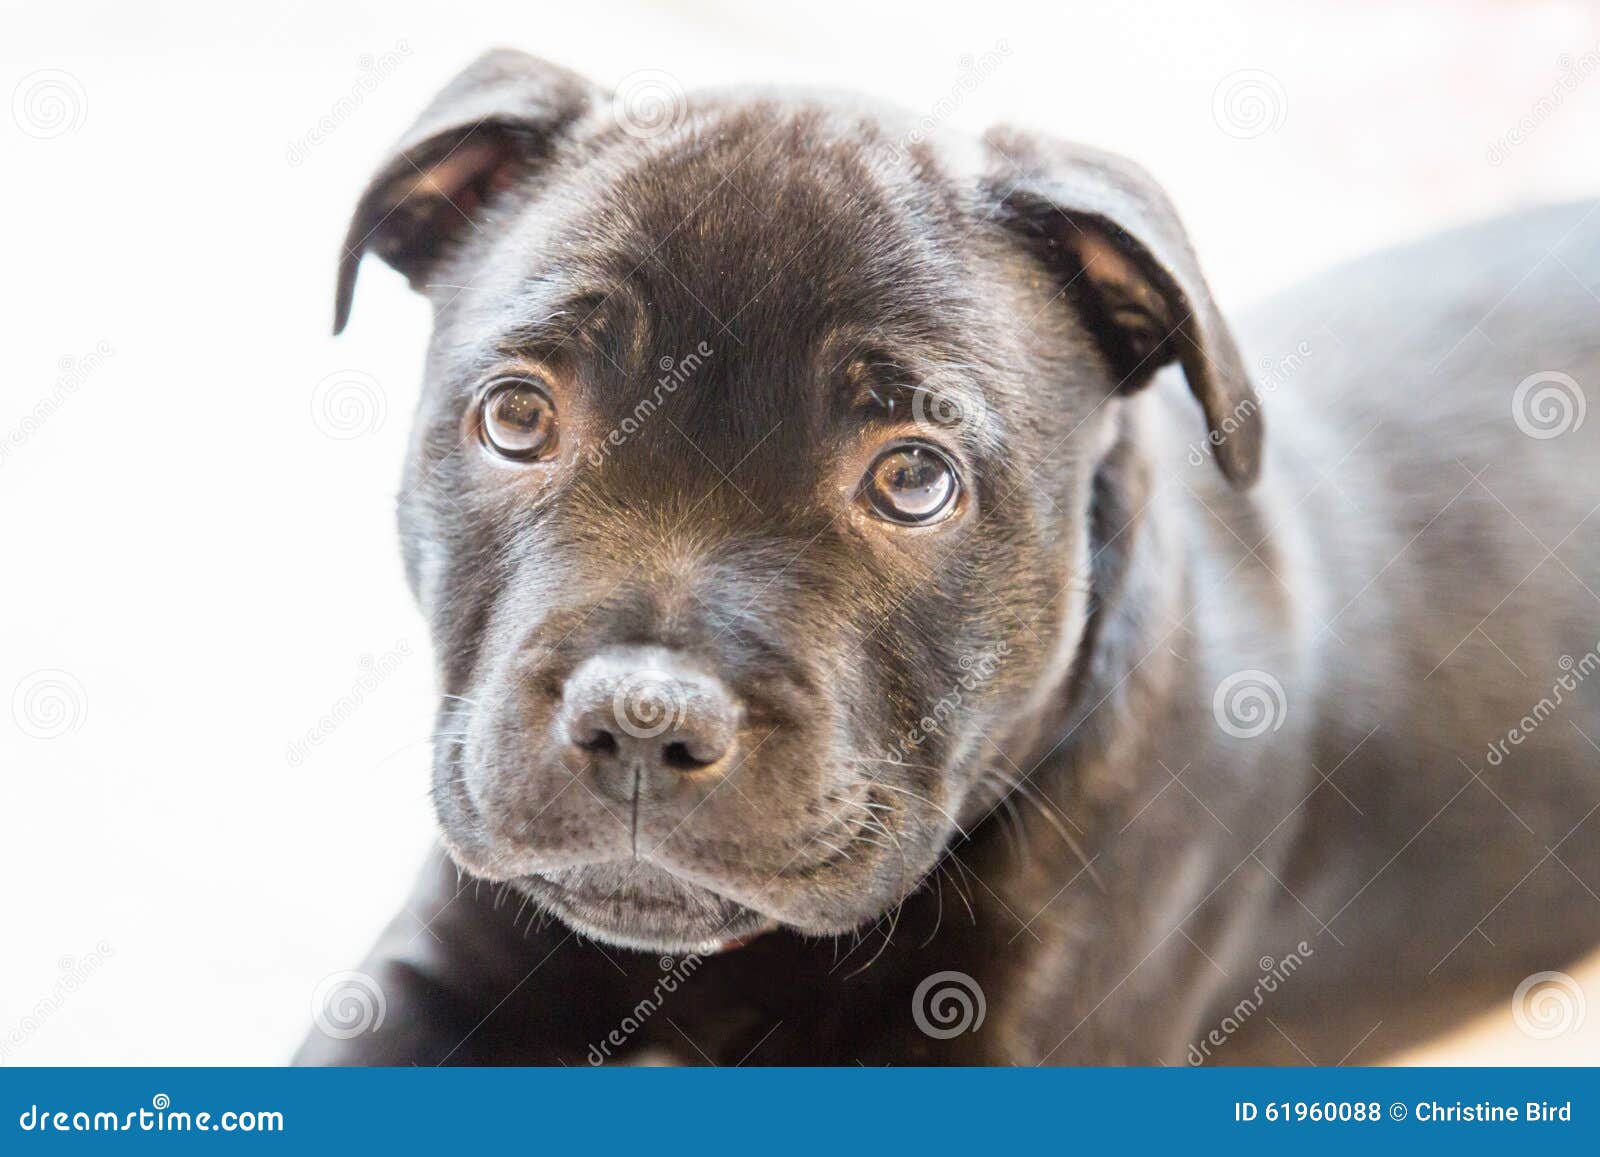 Portrait Of A Black Staffordshire Bull Terrier Puppy Stock Photo Image Of Lying Bull 61960088